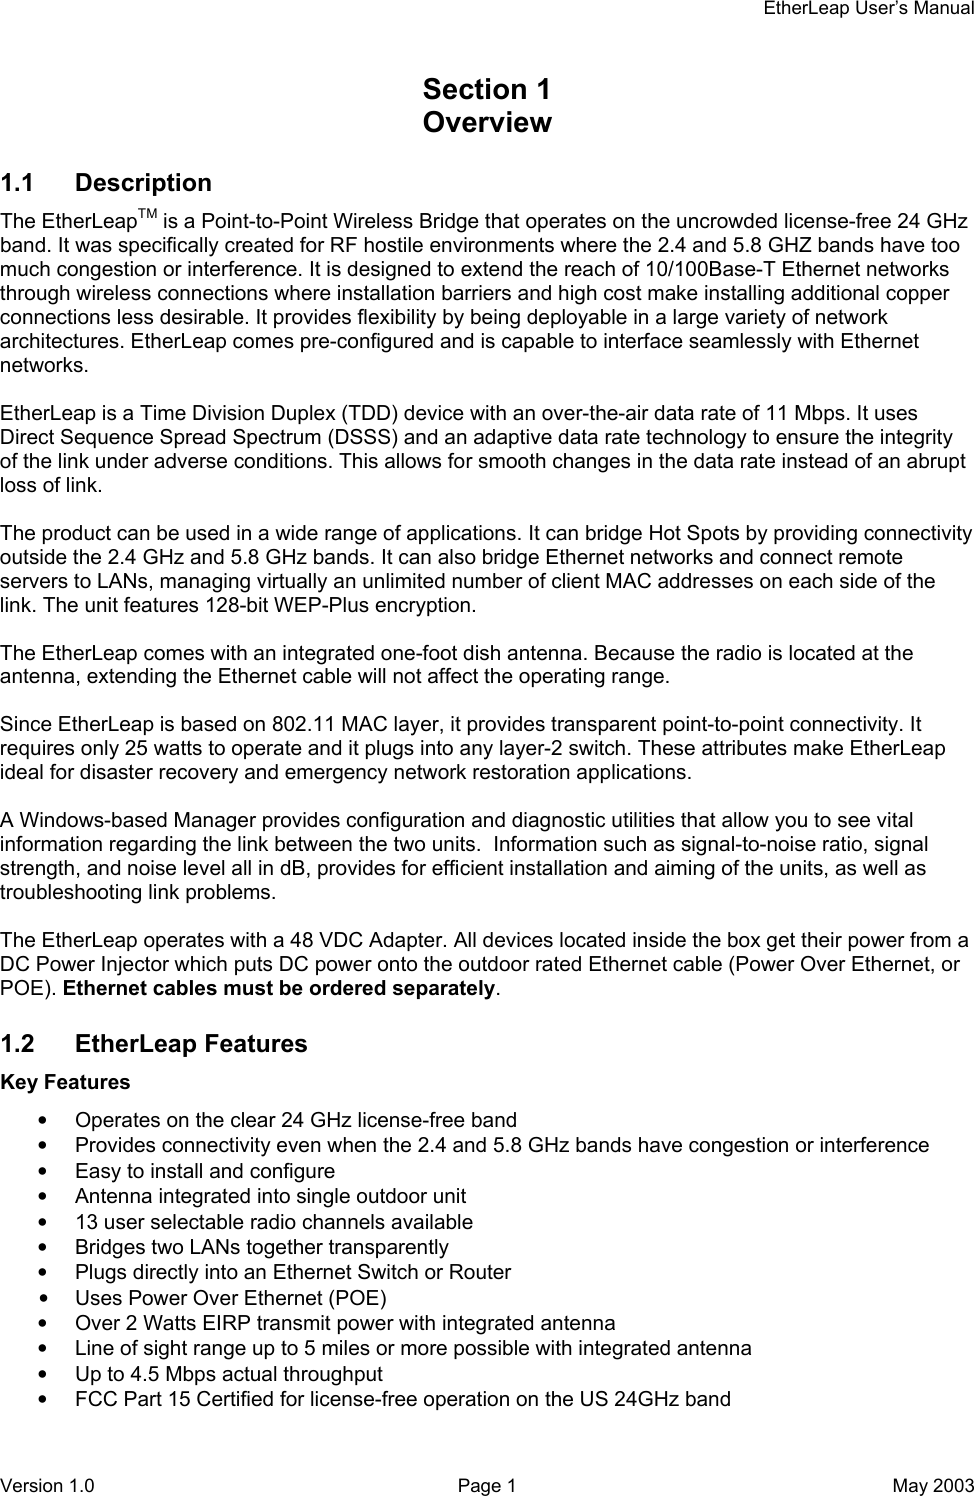     EtherLeap User’s Manual Section 1    Overview 1.1 Description The EtherLeapTM is a Point-to-Point Wireless Bridge that operates on the uncrowded license-free 24 GHz band. It was specifically created for RF hostile environments where the 2.4 and 5.8 GHZ bands have too much congestion or interference. It is designed to extend the reach of 10/100Base-T Ethernet networks through wireless connections where installation barriers and high cost make installing additional copper connections less desirable. It provides flexibility by being deployable in a large variety of network architectures. EtherLeap comes pre-configured and is capable to interface seamlessly with Ethernet networks.  EtherLeap is a Time Division Duplex (TDD) device with an over-the-air data rate of 11 Mbps. It uses Direct Sequence Spread Spectrum (DSSS) and an adaptive data rate technology to ensure the integrity of the link under adverse conditions. This allows for smooth changes in the data rate instead of an abrupt loss of link.  The product can be used in a wide range of applications. It can bridge Hot Spots by providing connectivity outside the 2.4 GHz and 5.8 GHz bands. It can also bridge Ethernet networks and connect remote servers to LANs, managing virtually an unlimited number of client MAC addresses on each side of the link. The unit features 128-bit WEP-Plus encryption.  The EtherLeap comes with an integrated one-foot dish antenna. Because the radio is located at the antenna, extending the Ethernet cable will not affect the operating range.  Since EtherLeap is based on 802.11 MAC layer, it provides transparent point-to-point connectivity. It requires only 25 watts to operate and it plugs into any layer-2 switch. These attributes make EtherLeap ideal for disaster recovery and emergency network restoration applications.  A Windows-based Manager provides configuration and diagnostic utilities that allow you to see vital information regarding the link between the two units.  Information such as signal-to-noise ratio, signal strength, and noise level all in dB, provides for efficient installation and aiming of the units, as well as troubleshooting link problems.  The EtherLeap operates with a 48 VDC Adapter. All devices located inside the box get their power from a DC Power Injector which puts DC power onto the outdoor rated Ethernet cable (Power Over Ethernet, or POE). Ethernet cables must be ordered separately. 1.2 EtherLeap Features Key Features •  Operates on the clear 24 GHz license-free band •  Provides connectivity even when the 2.4 and 5.8 GHz bands have congestion or interference •  Easy to install and configure •  Antenna integrated into single outdoor unit •  13 user selectable radio channels available •  Bridges two LANs together transparently •  Plugs directly into an Ethernet Switch or Router •  Uses Power Over Ethernet (POE) •  Over 2 Watts EIRP transmit power with integrated antenna •  Line of sight range up to 5 miles or more possible with integrated antenna •  Up to 4.5 Mbps actual throughput •  FCC Part 15 Certified for license-free operation on the US 24GHz band Version 1.0  Page 1  May 2003 